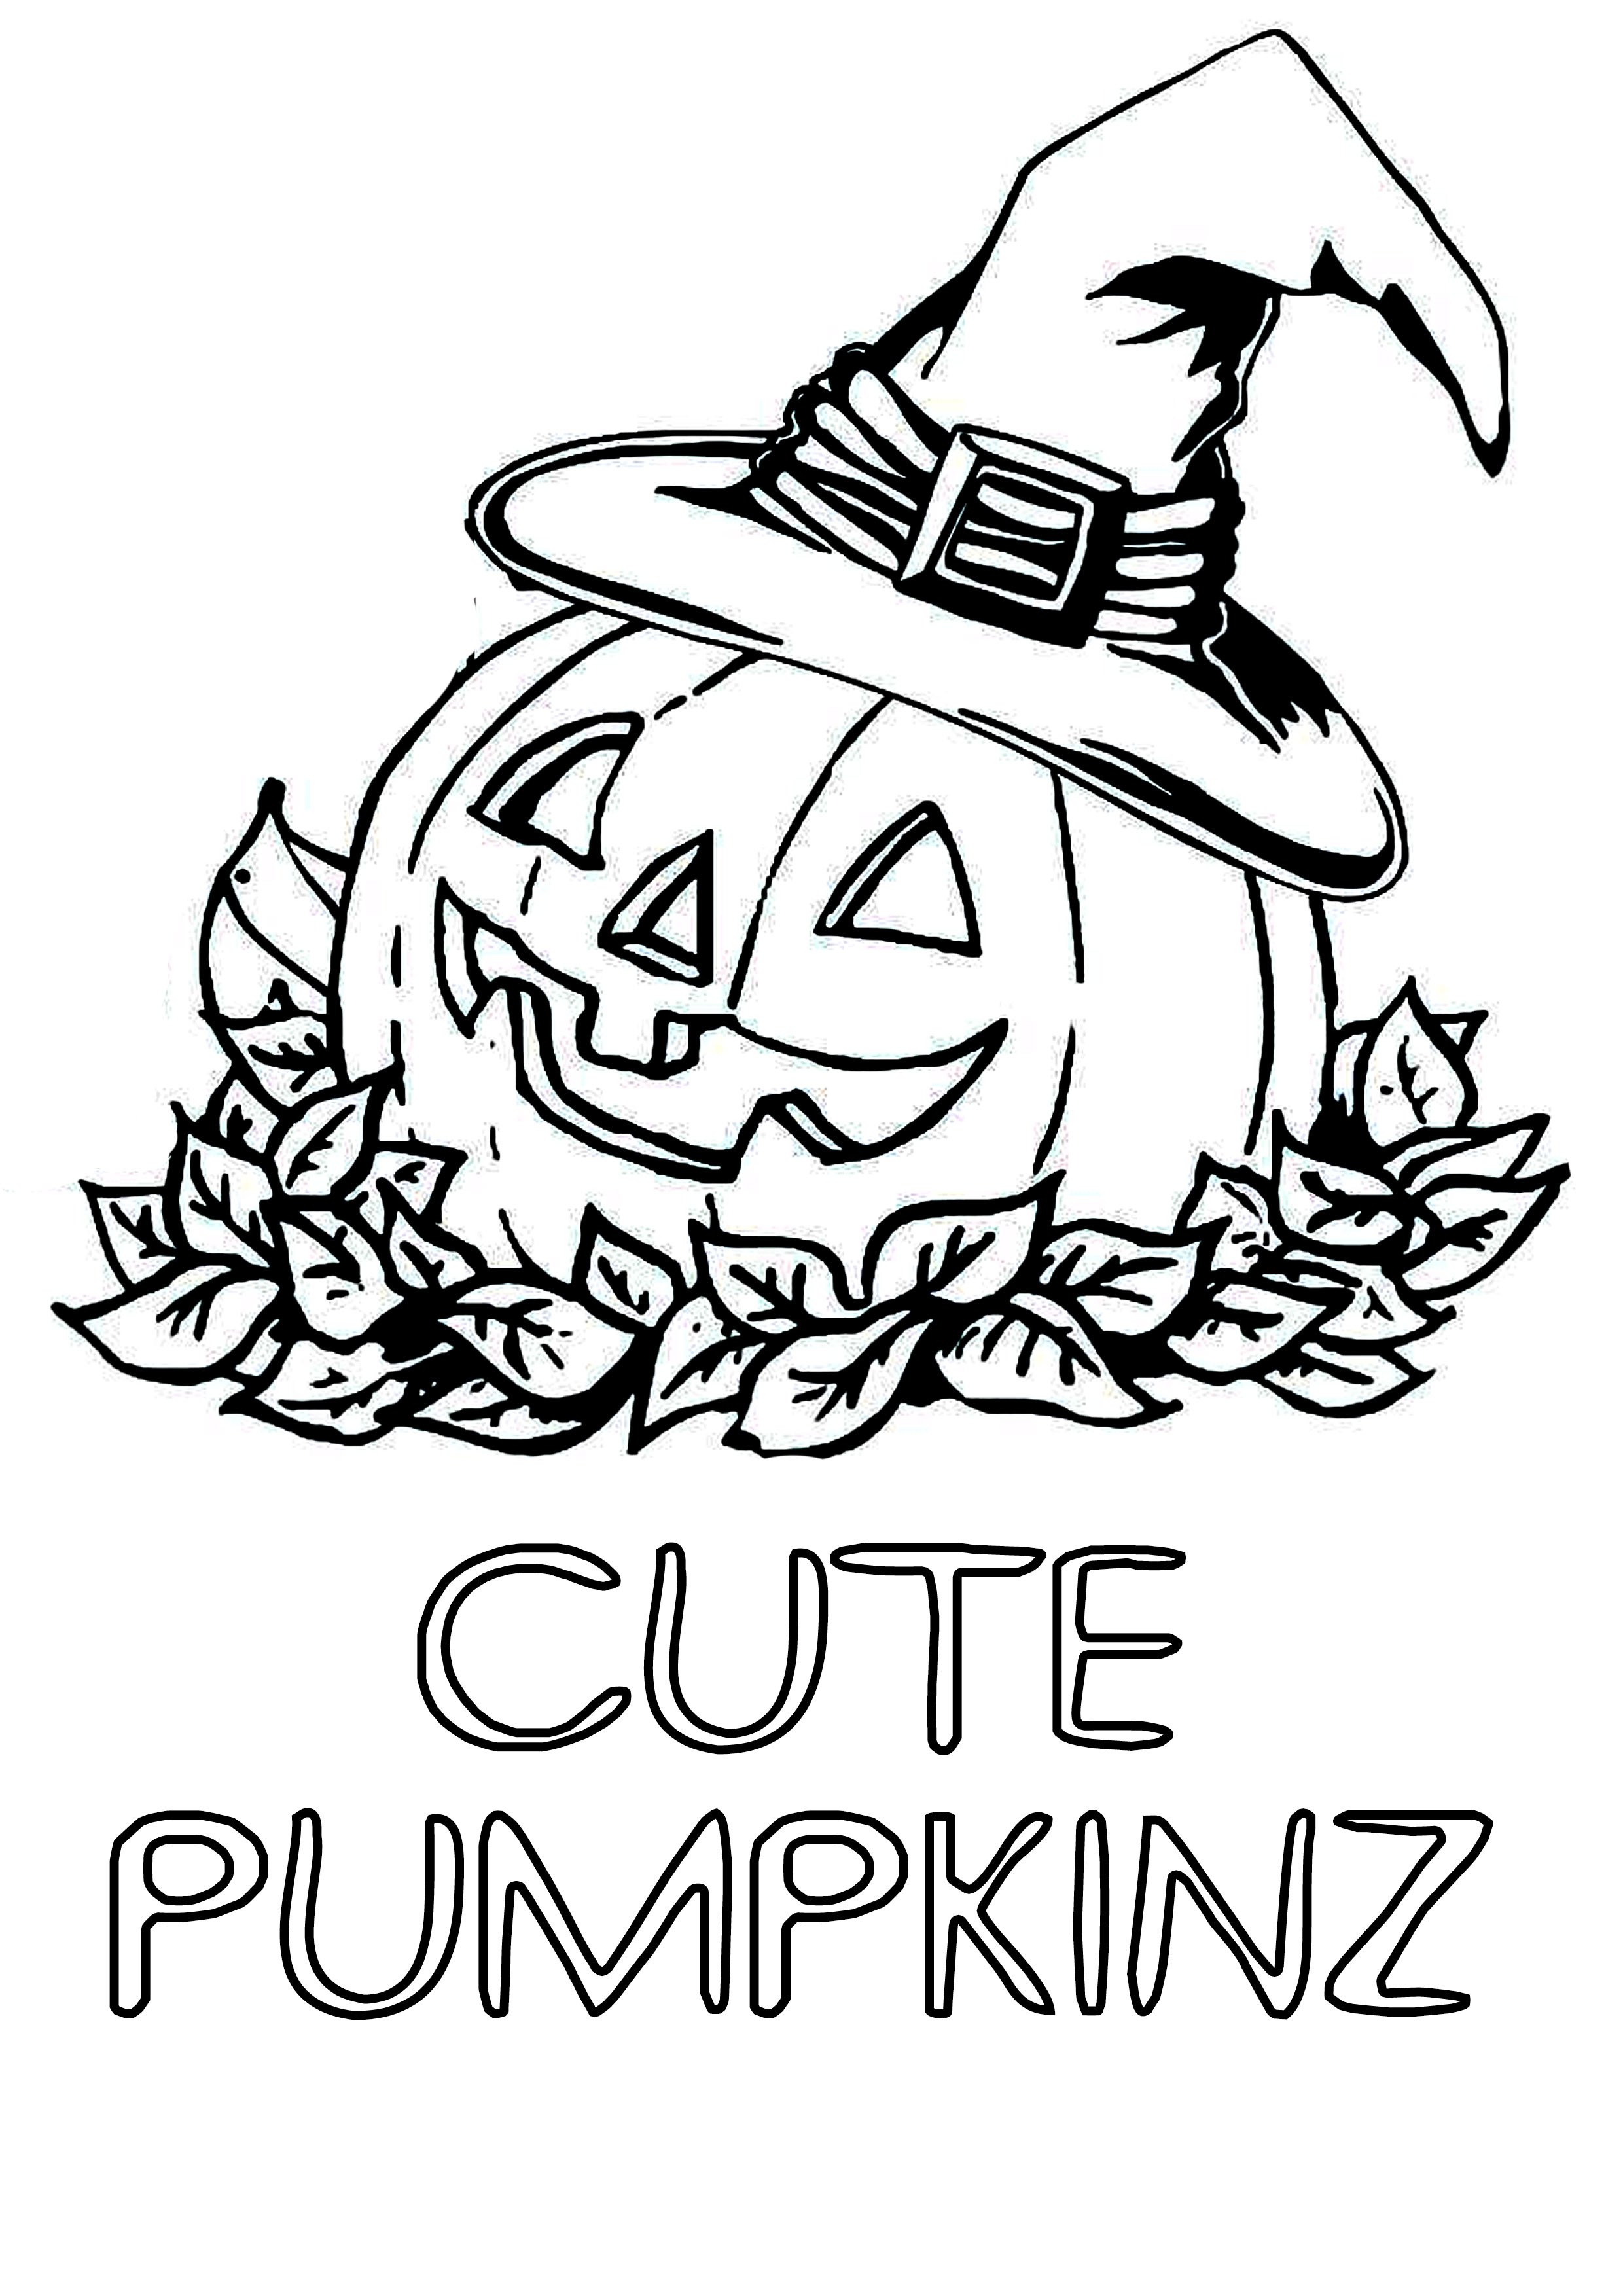 Cute Pumpkin Coloring Pages In Designkids Wallpaper - Fall Landscape Colour Page - HD Wallpaper 